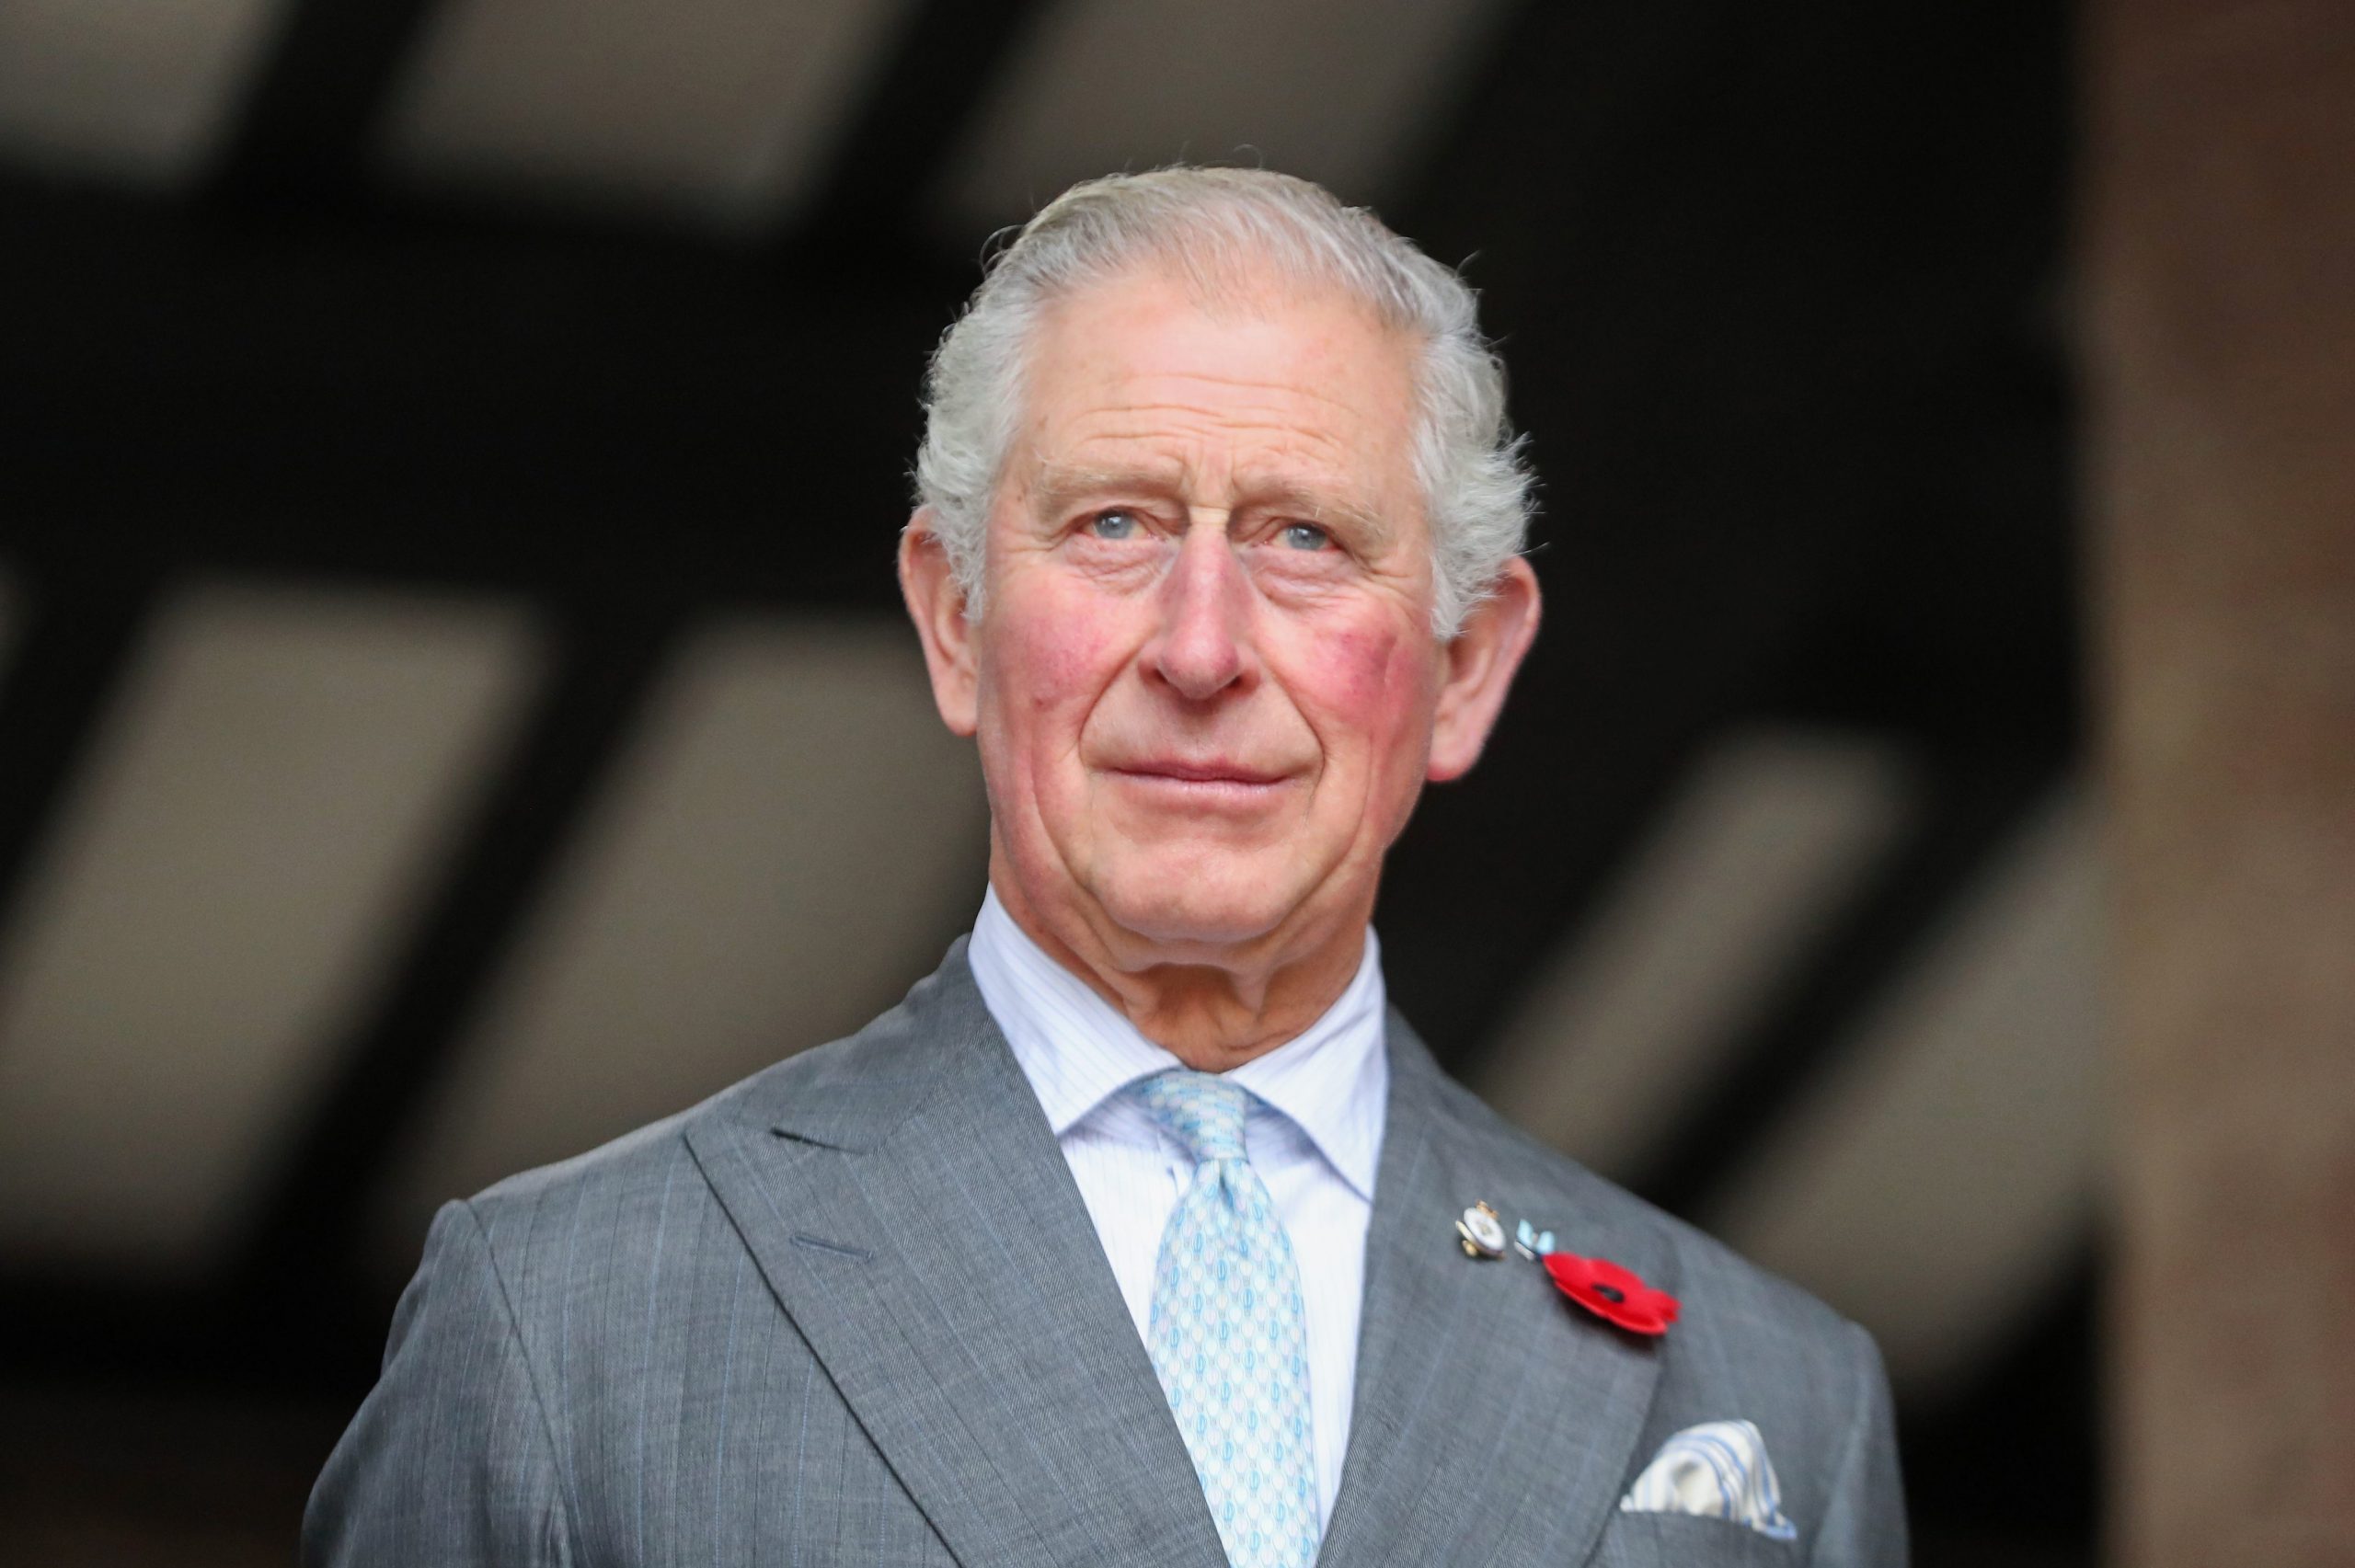 Will Camilla Be Queen if King Charles III Dies? What Happens When King  Charles Dies?